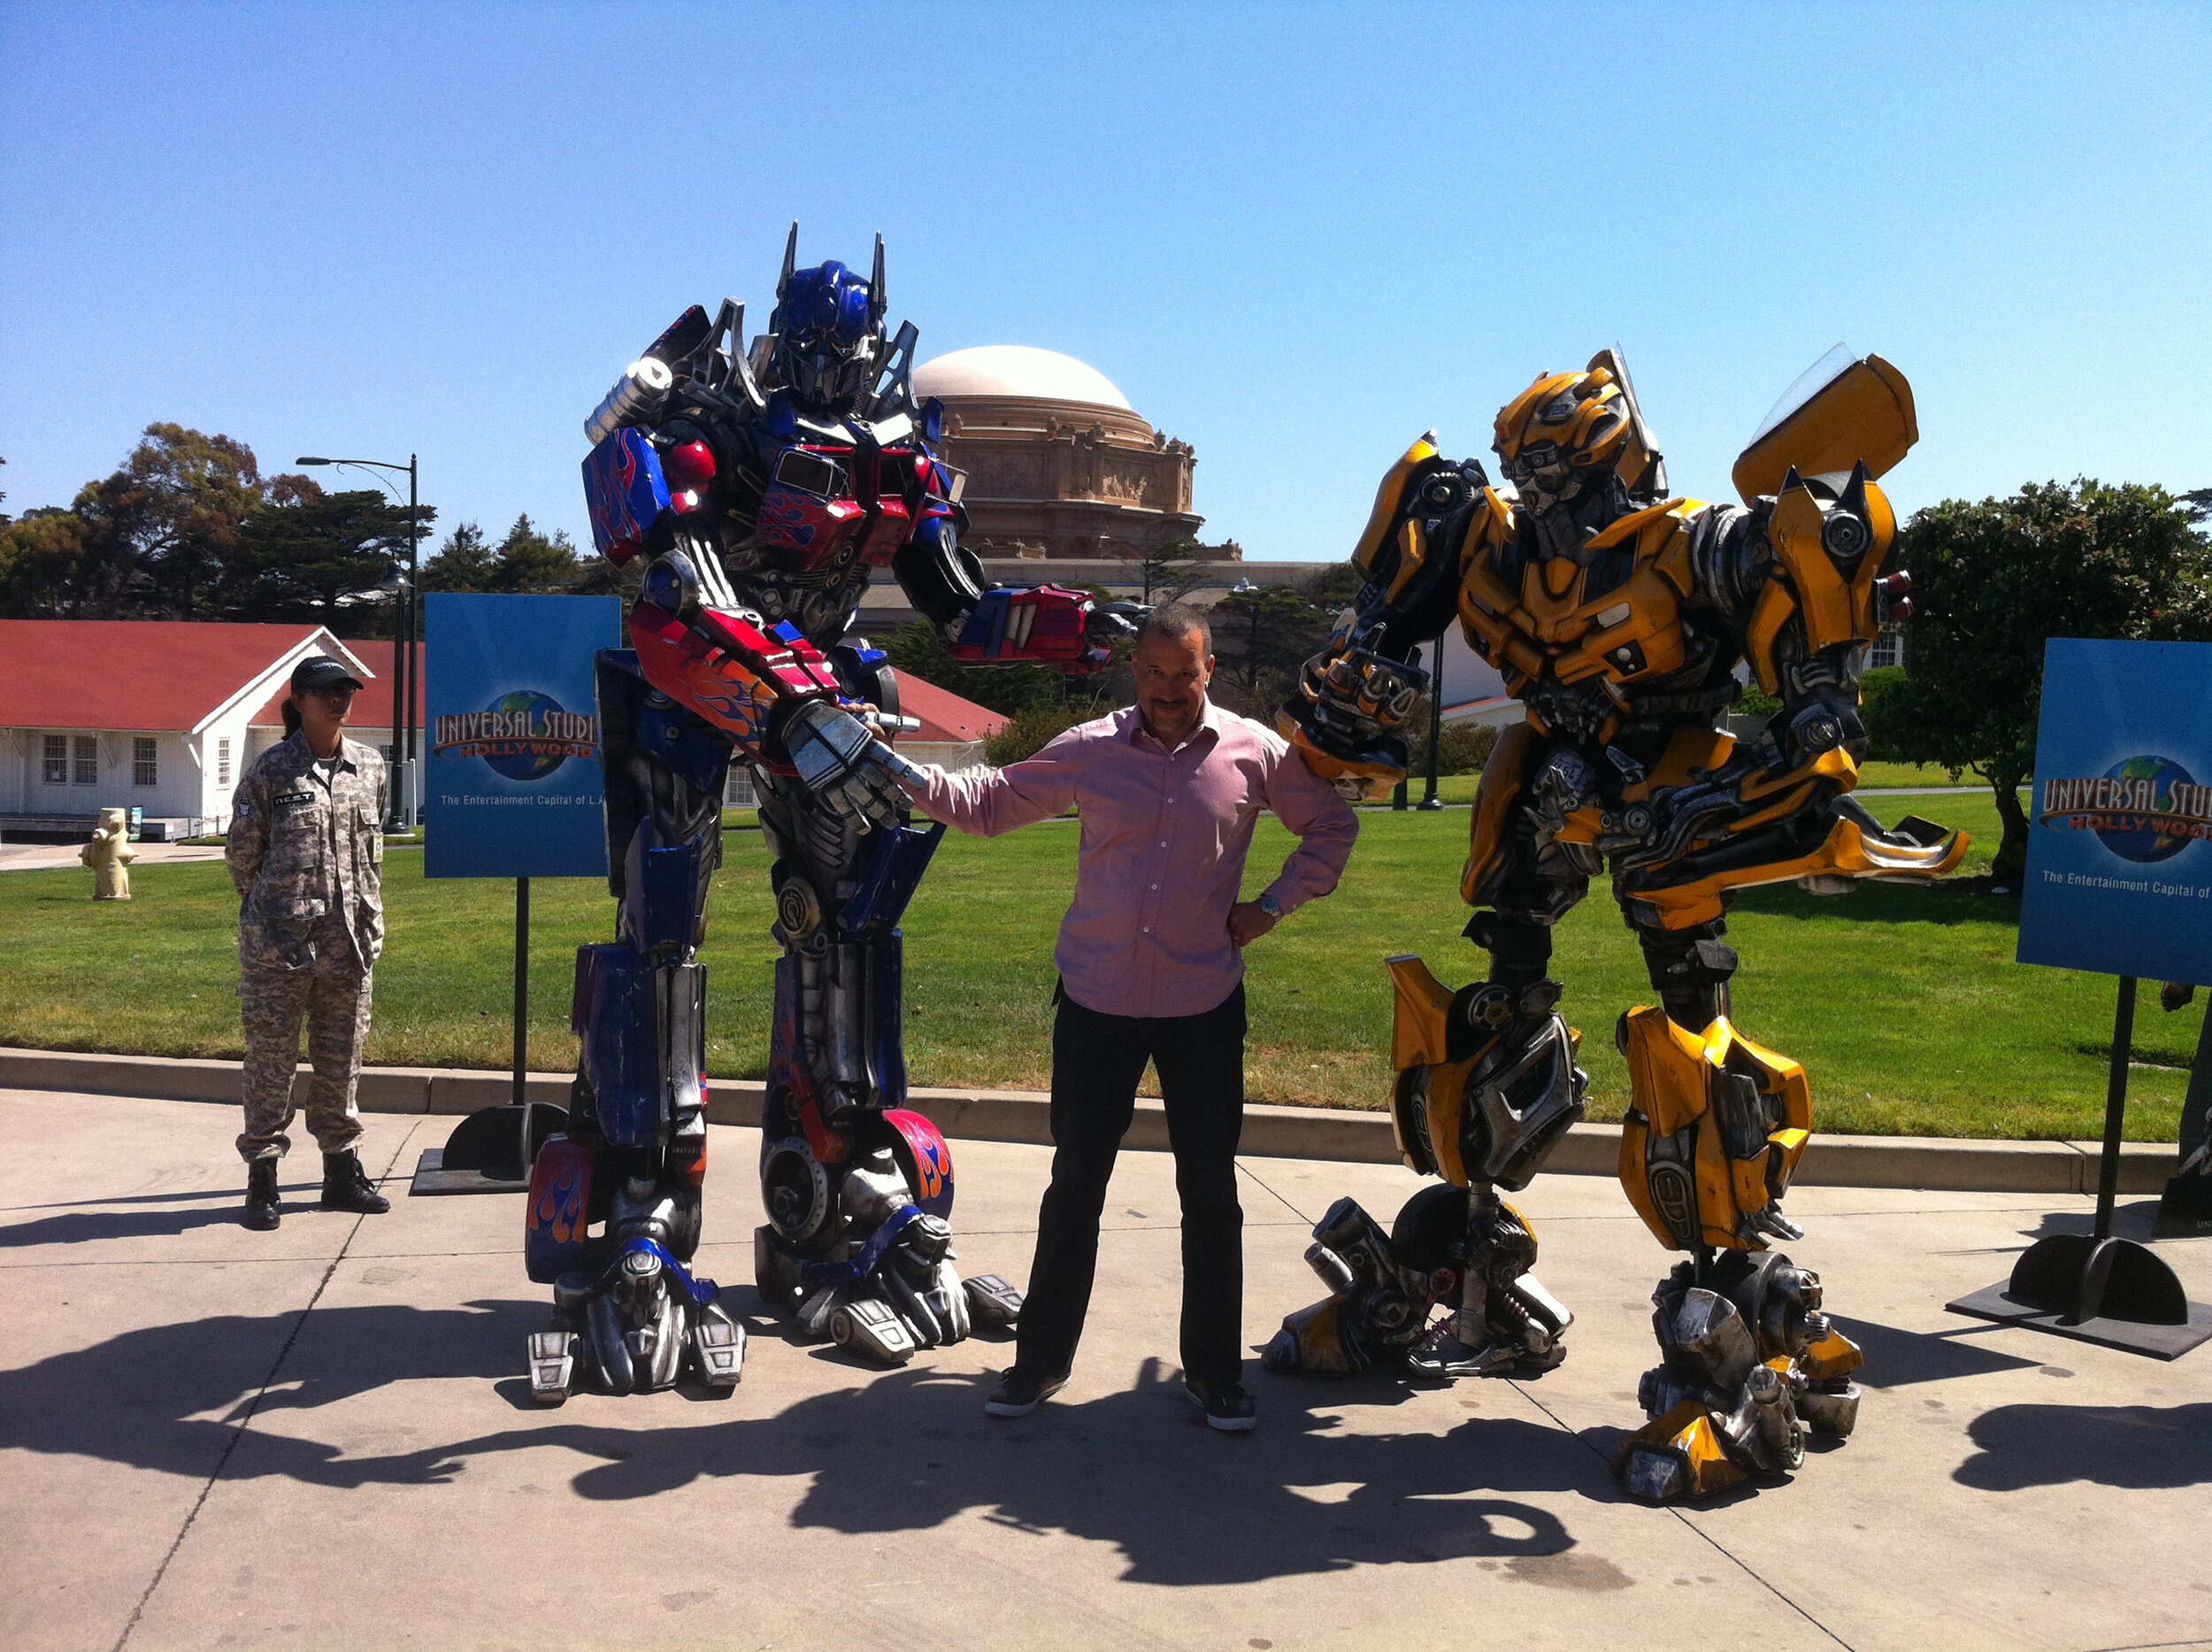  Miles at the Palace of Fine Arts with Optimus Prime and Bumble Bee.  